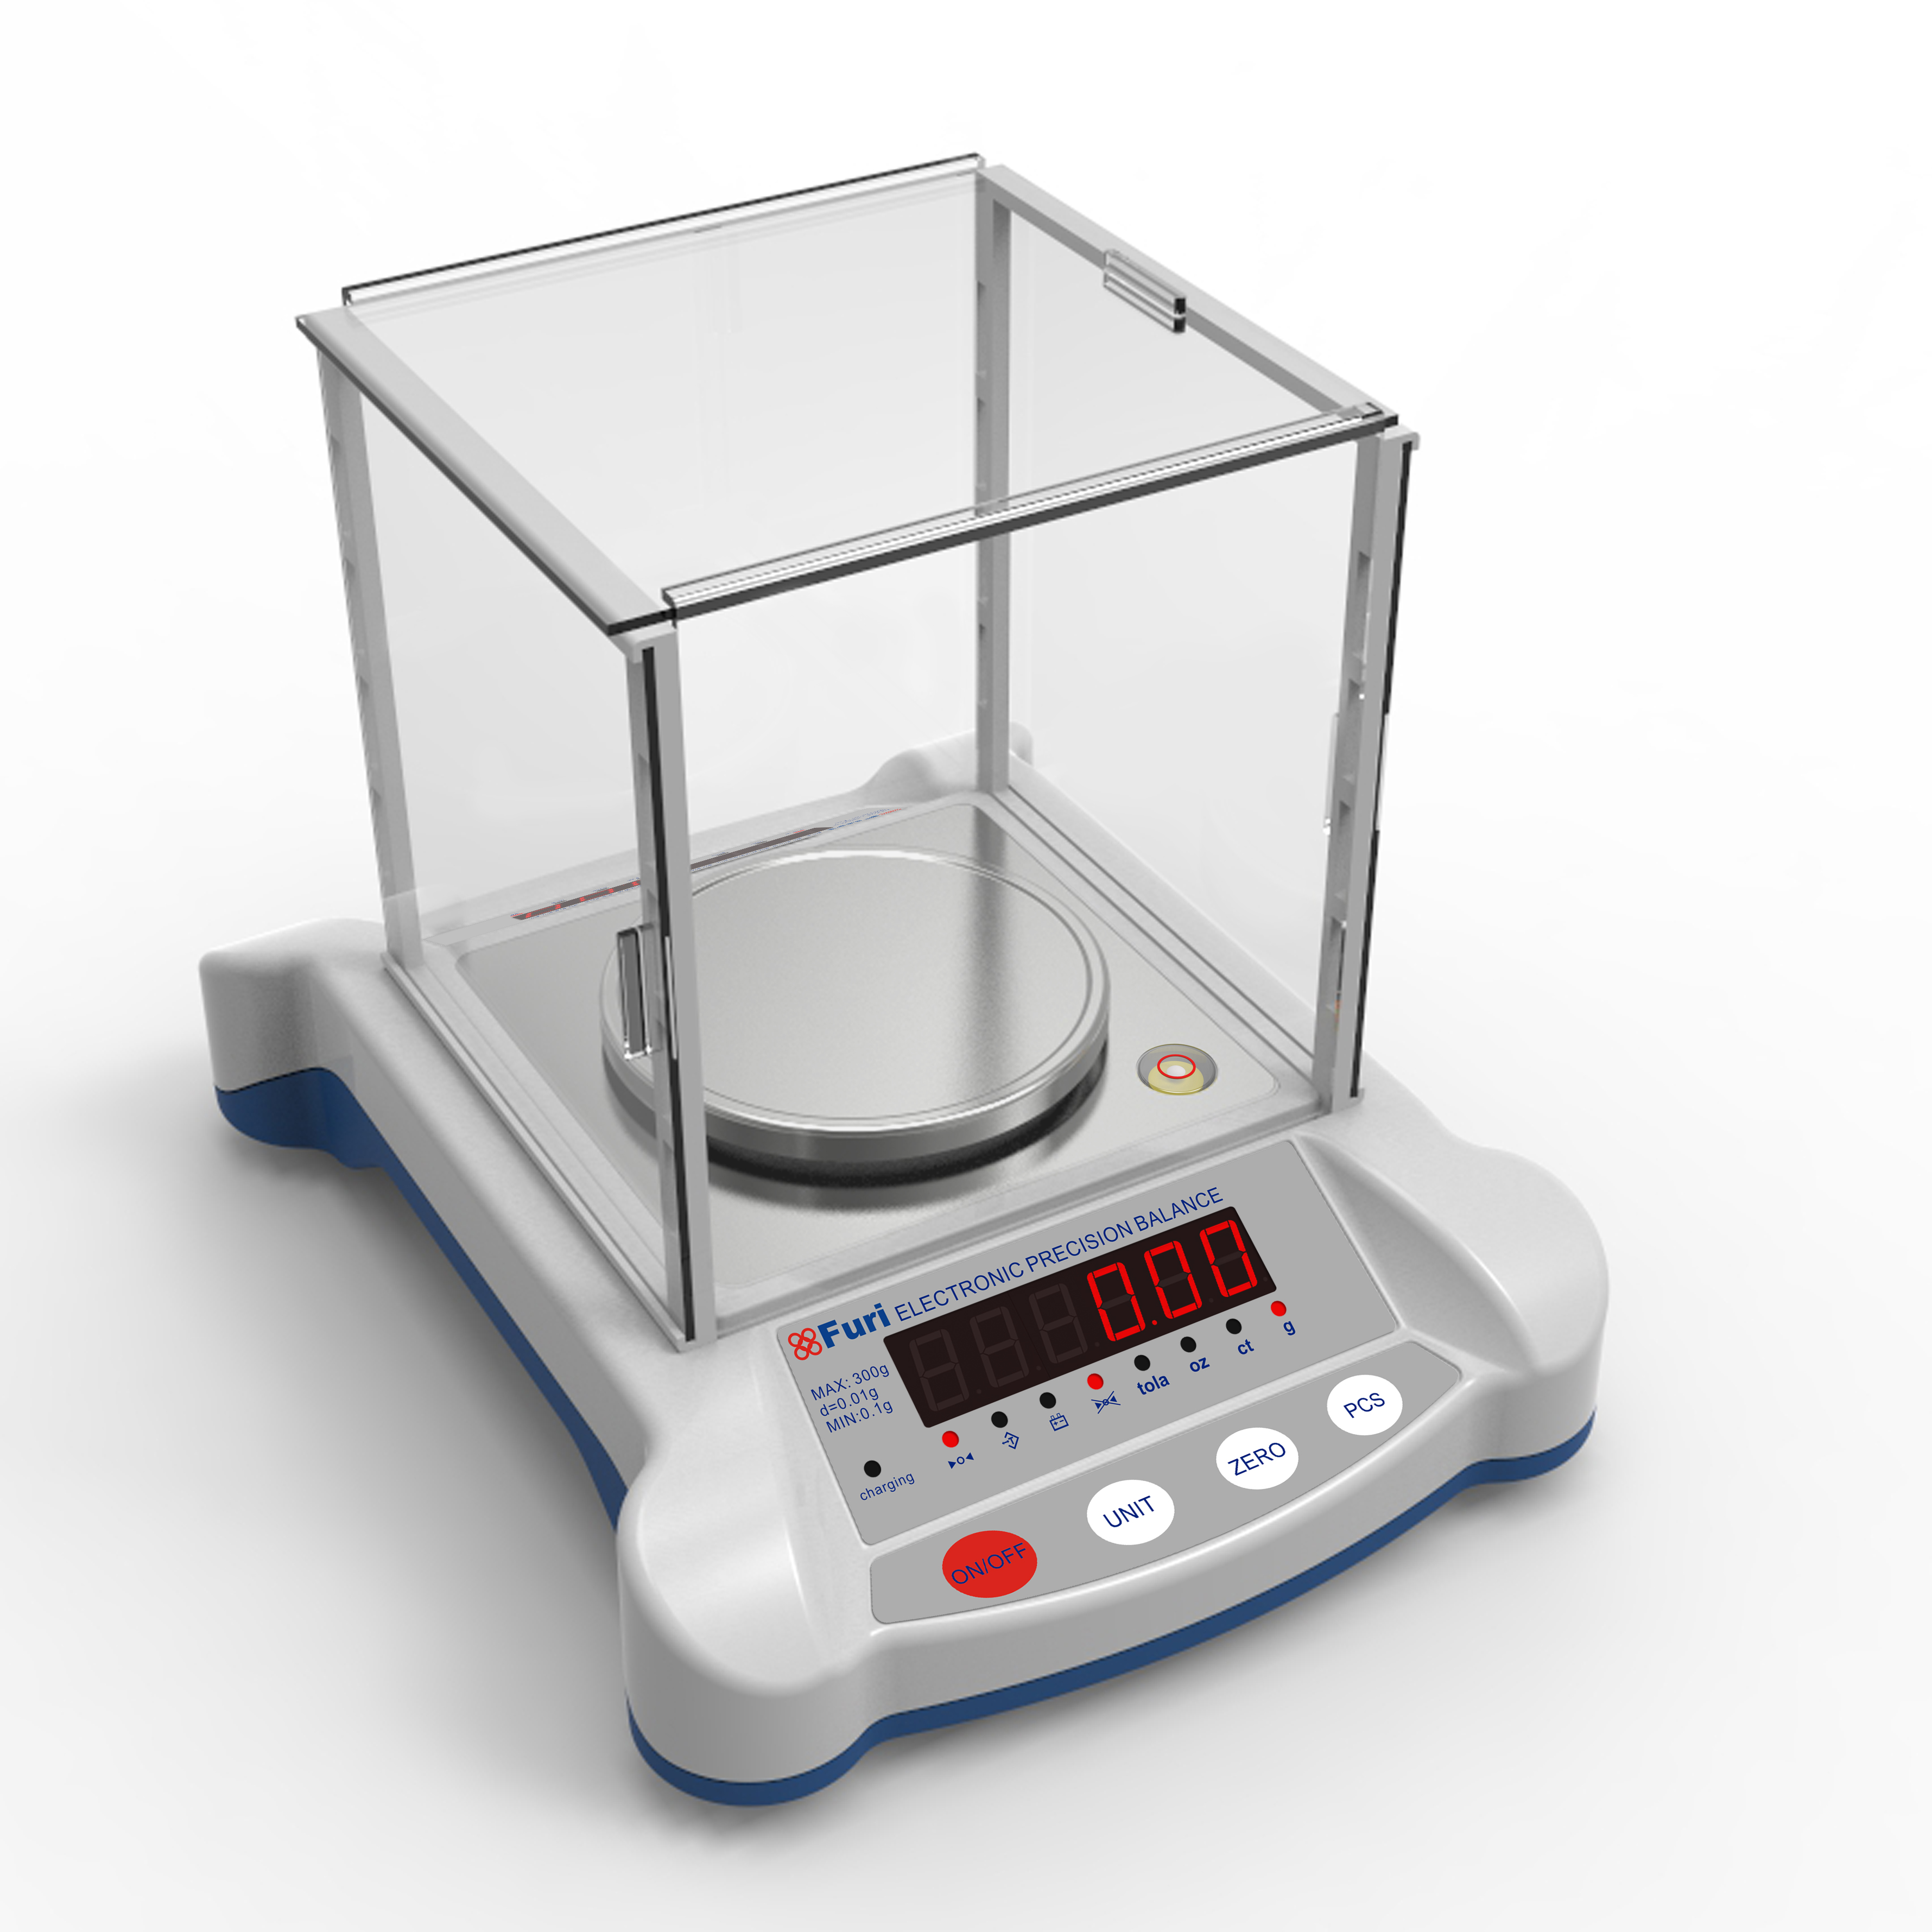 Weighing Scale Machine, Electronic Weighing Scale Manufacturer